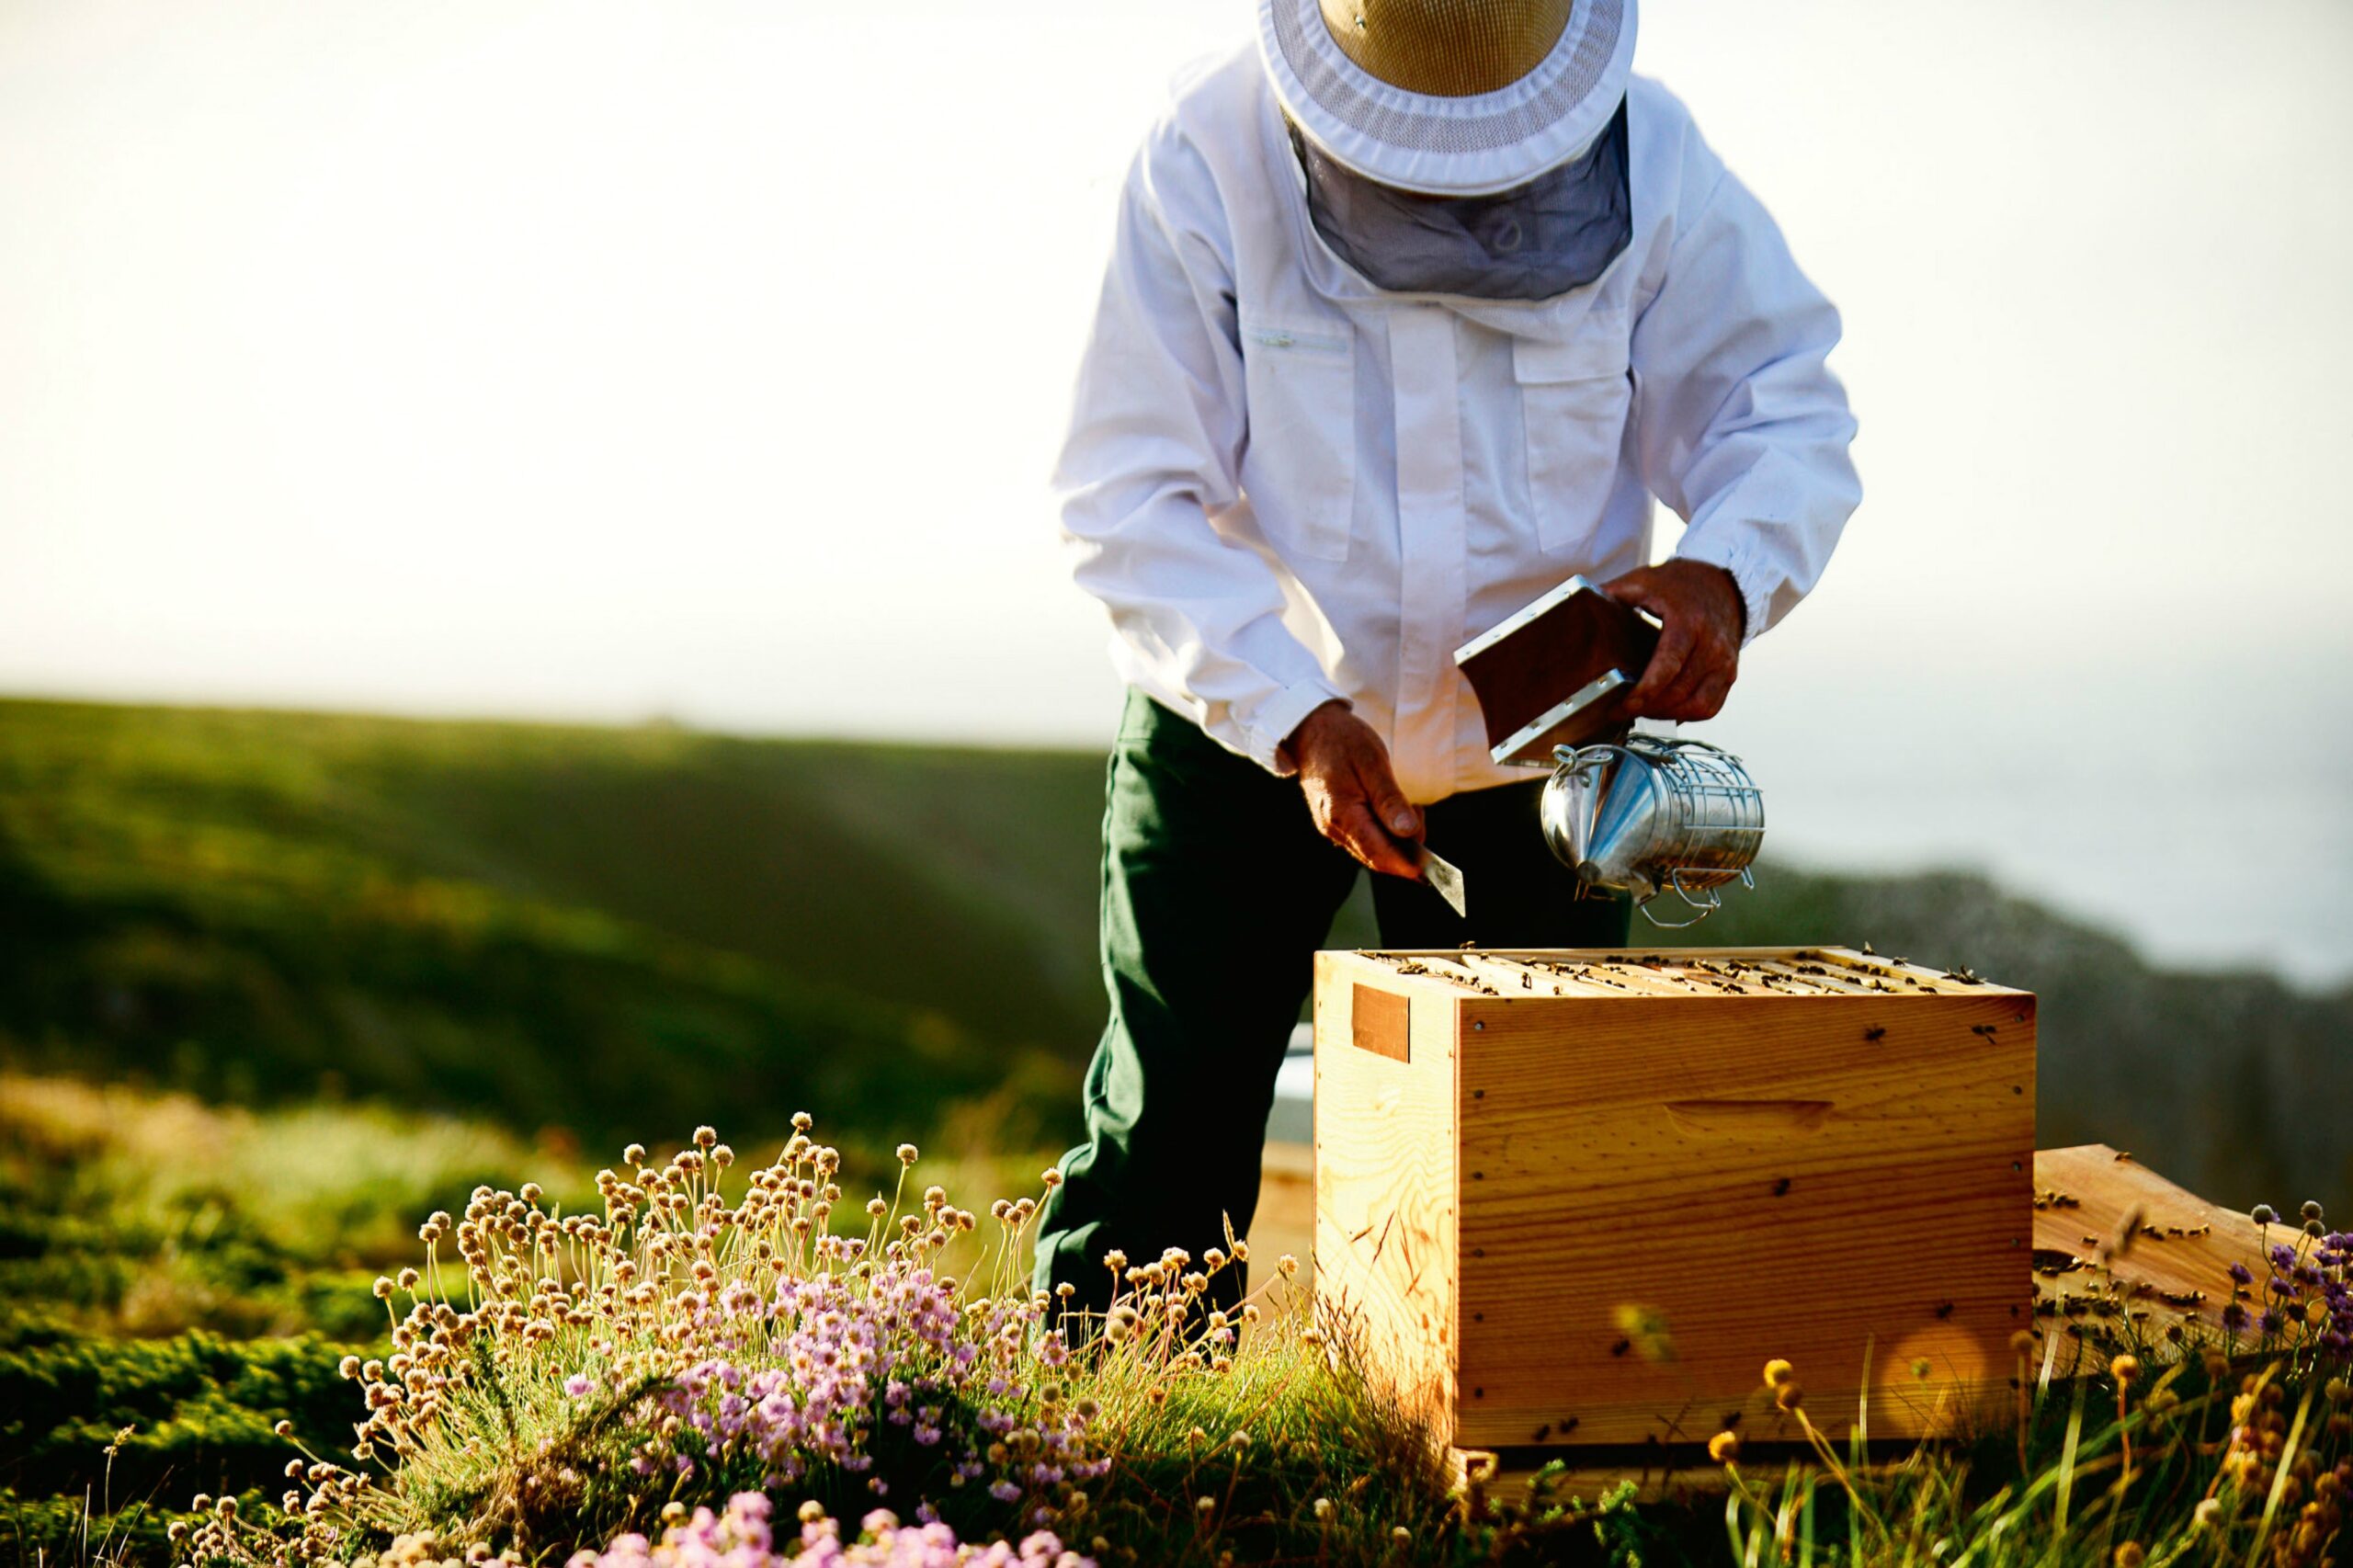 What are 5 key points I should know when studying beekeeping?